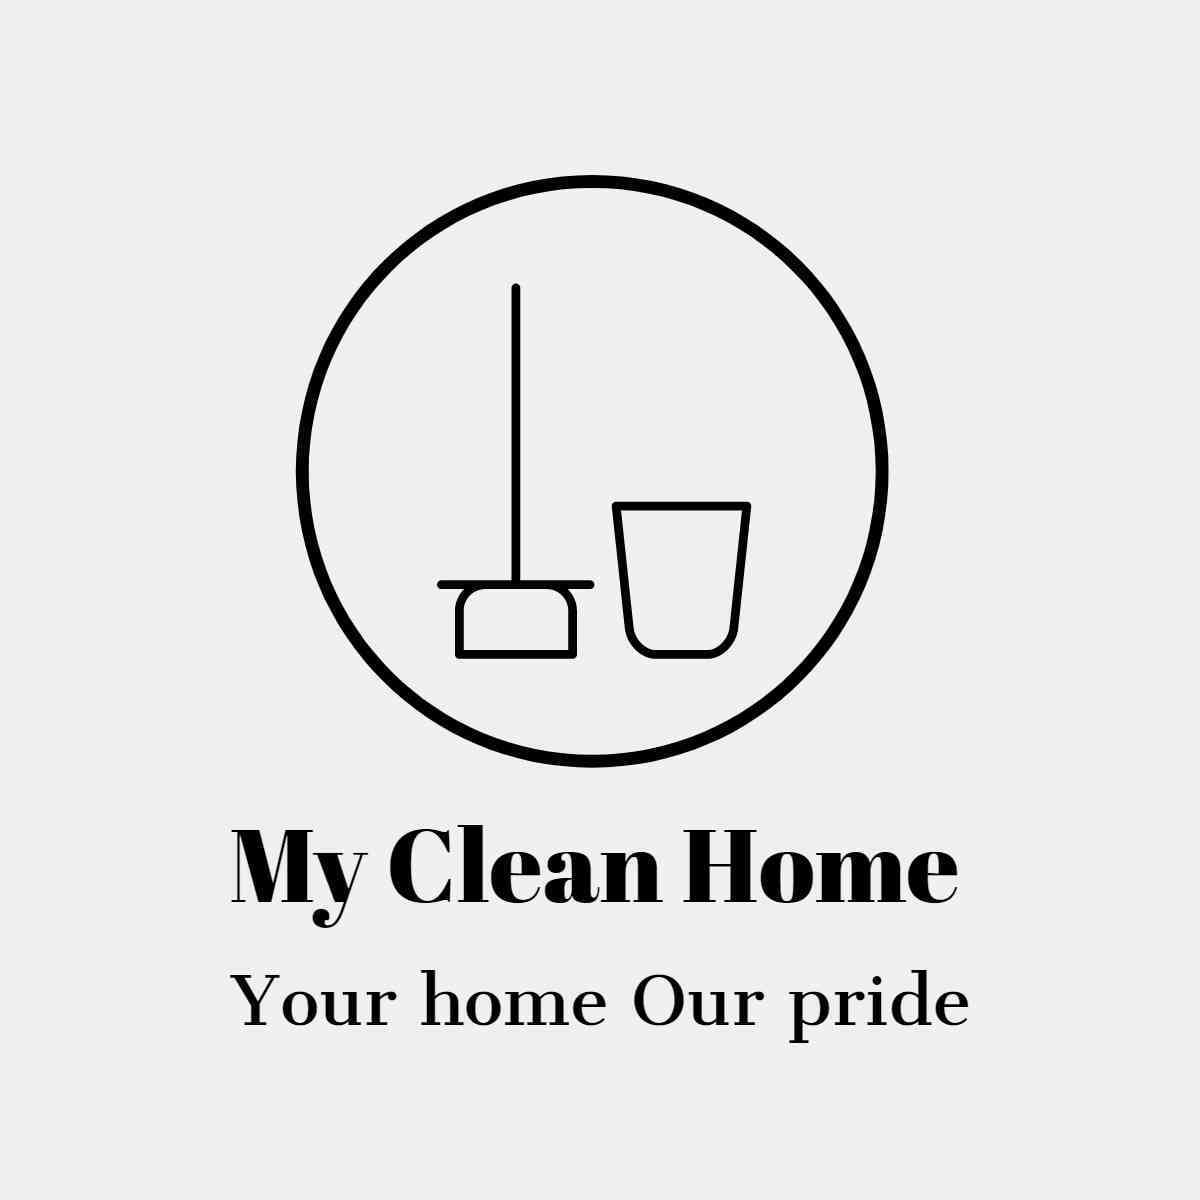 cleaning services, Tenancy Cleaning, Renovation, Handyman, Painting, Disinfection